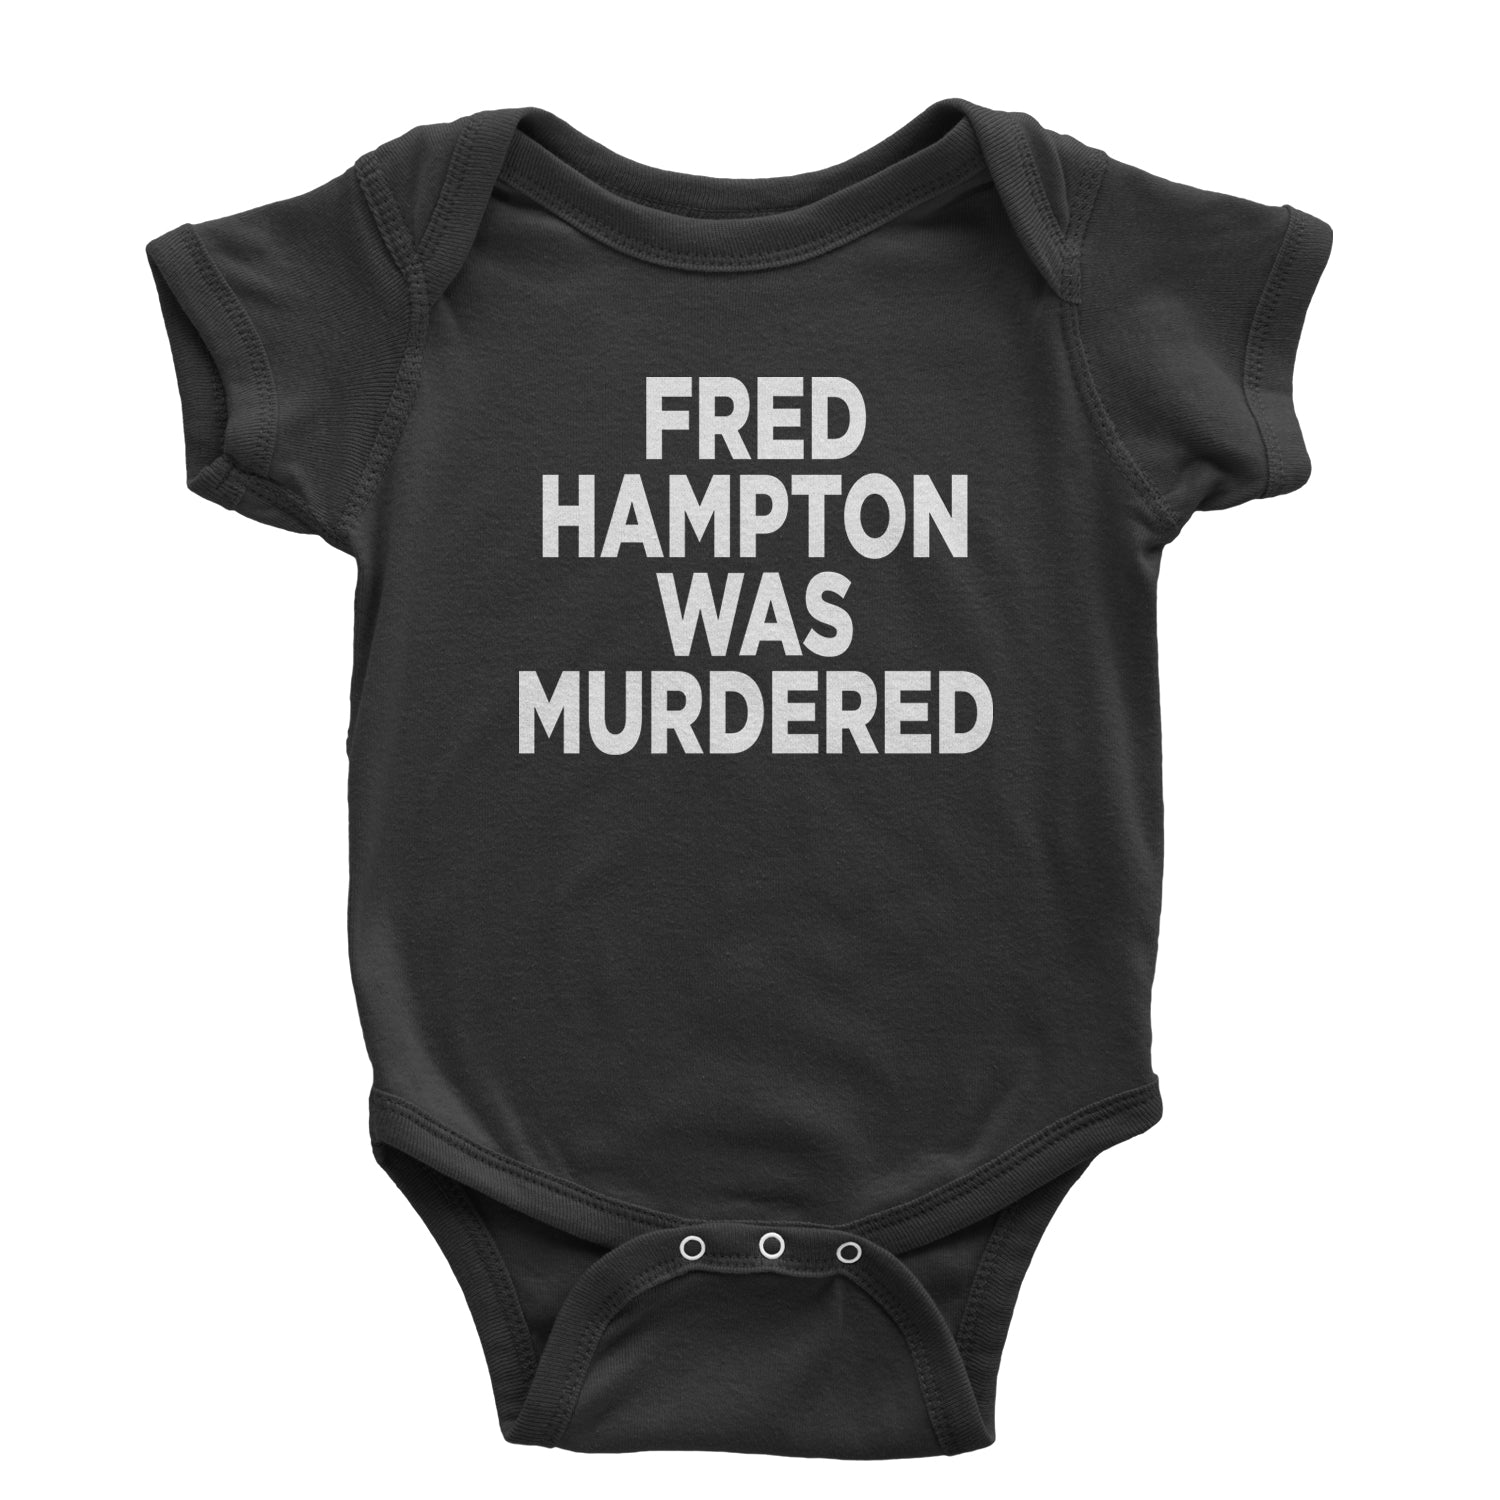 Fred Hampton Was Murdered Infant One-Piece Romper Bodysuit and Toddler T-shirt activism, african, africanamerican, american, black, blm, brutality, eddie, lives, matter, murphy, people, police, you by Expression Tees